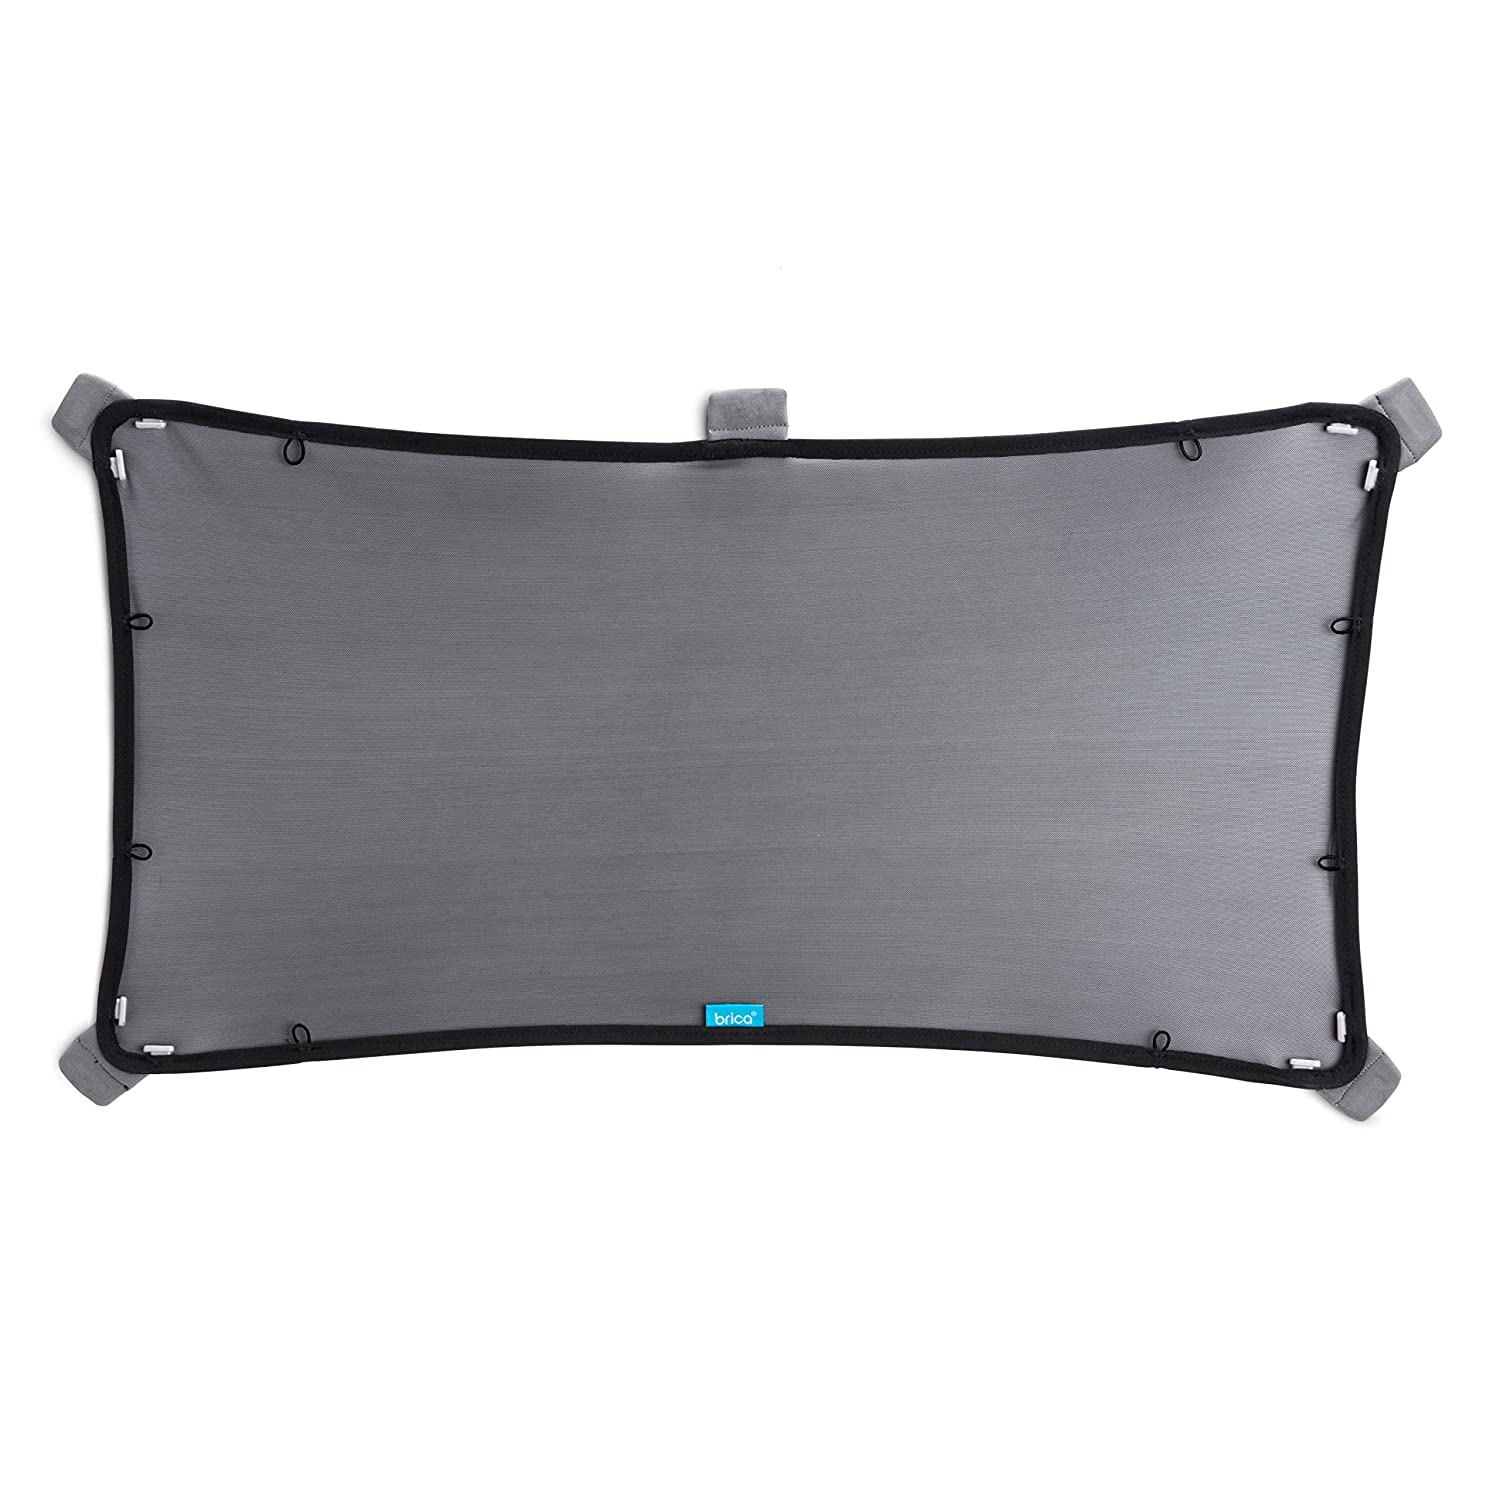 Munchkin Magnetic Stretch to Fit Sunshade, Black.